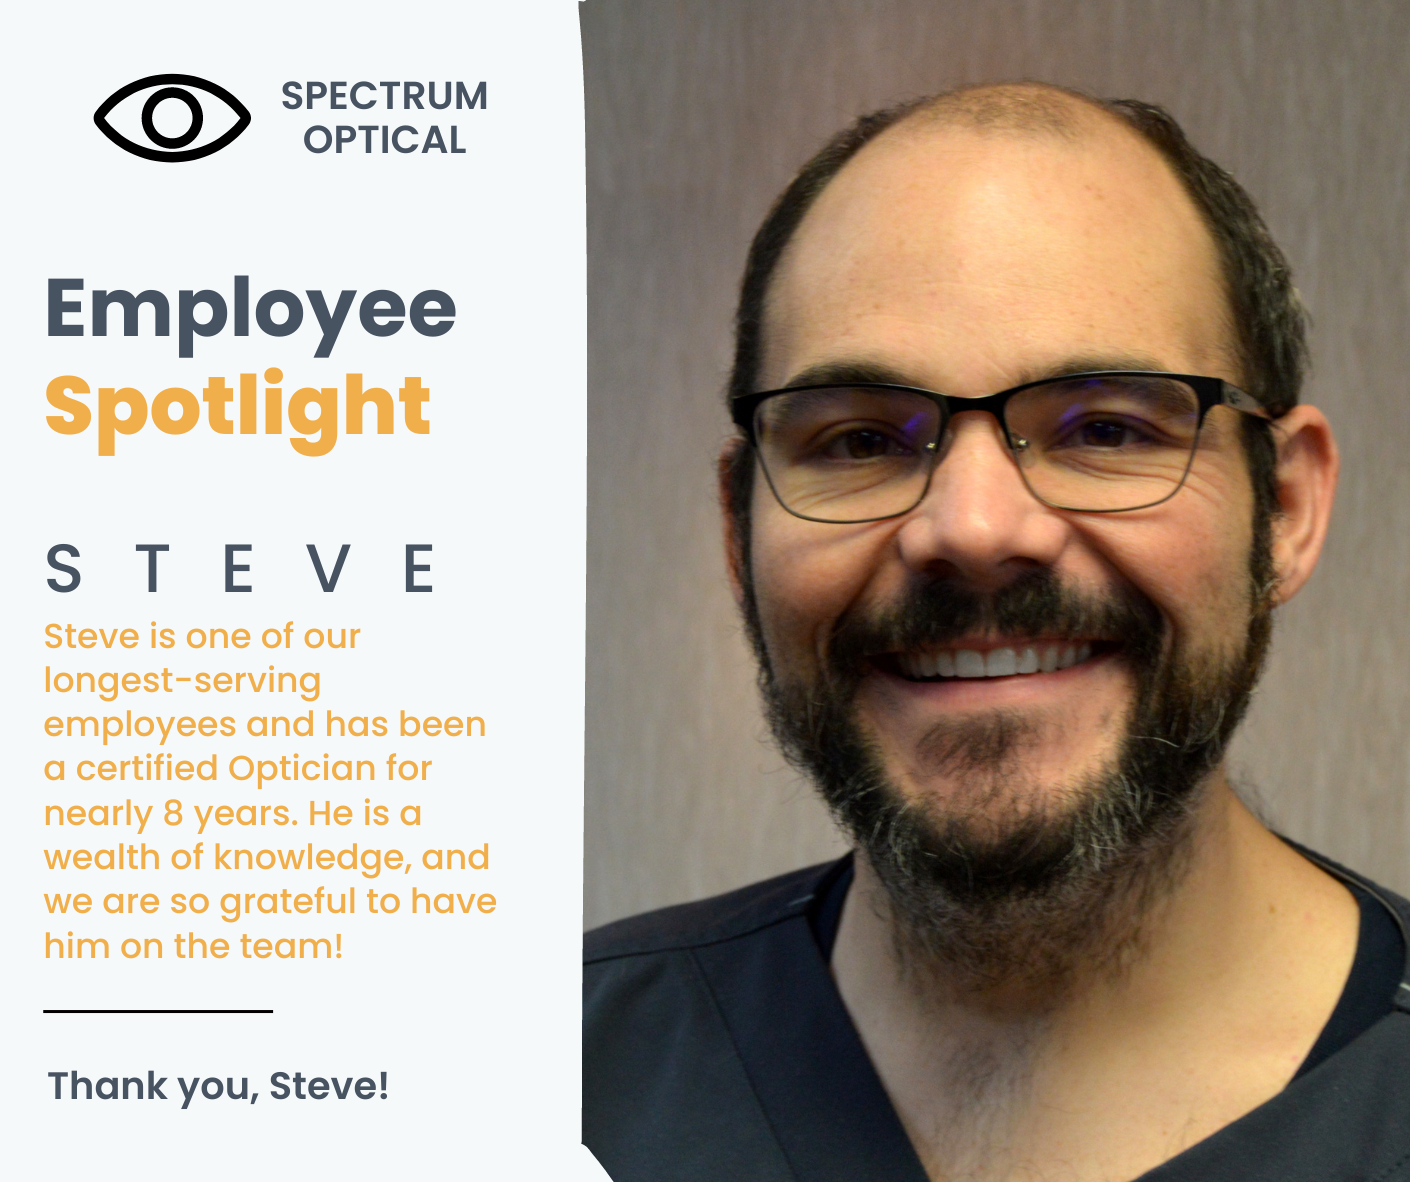 Employee Spotlight: A photo of a man named Steve, smiling at the camera, with text that describes his accomplishments as a certified Optician of eight years.